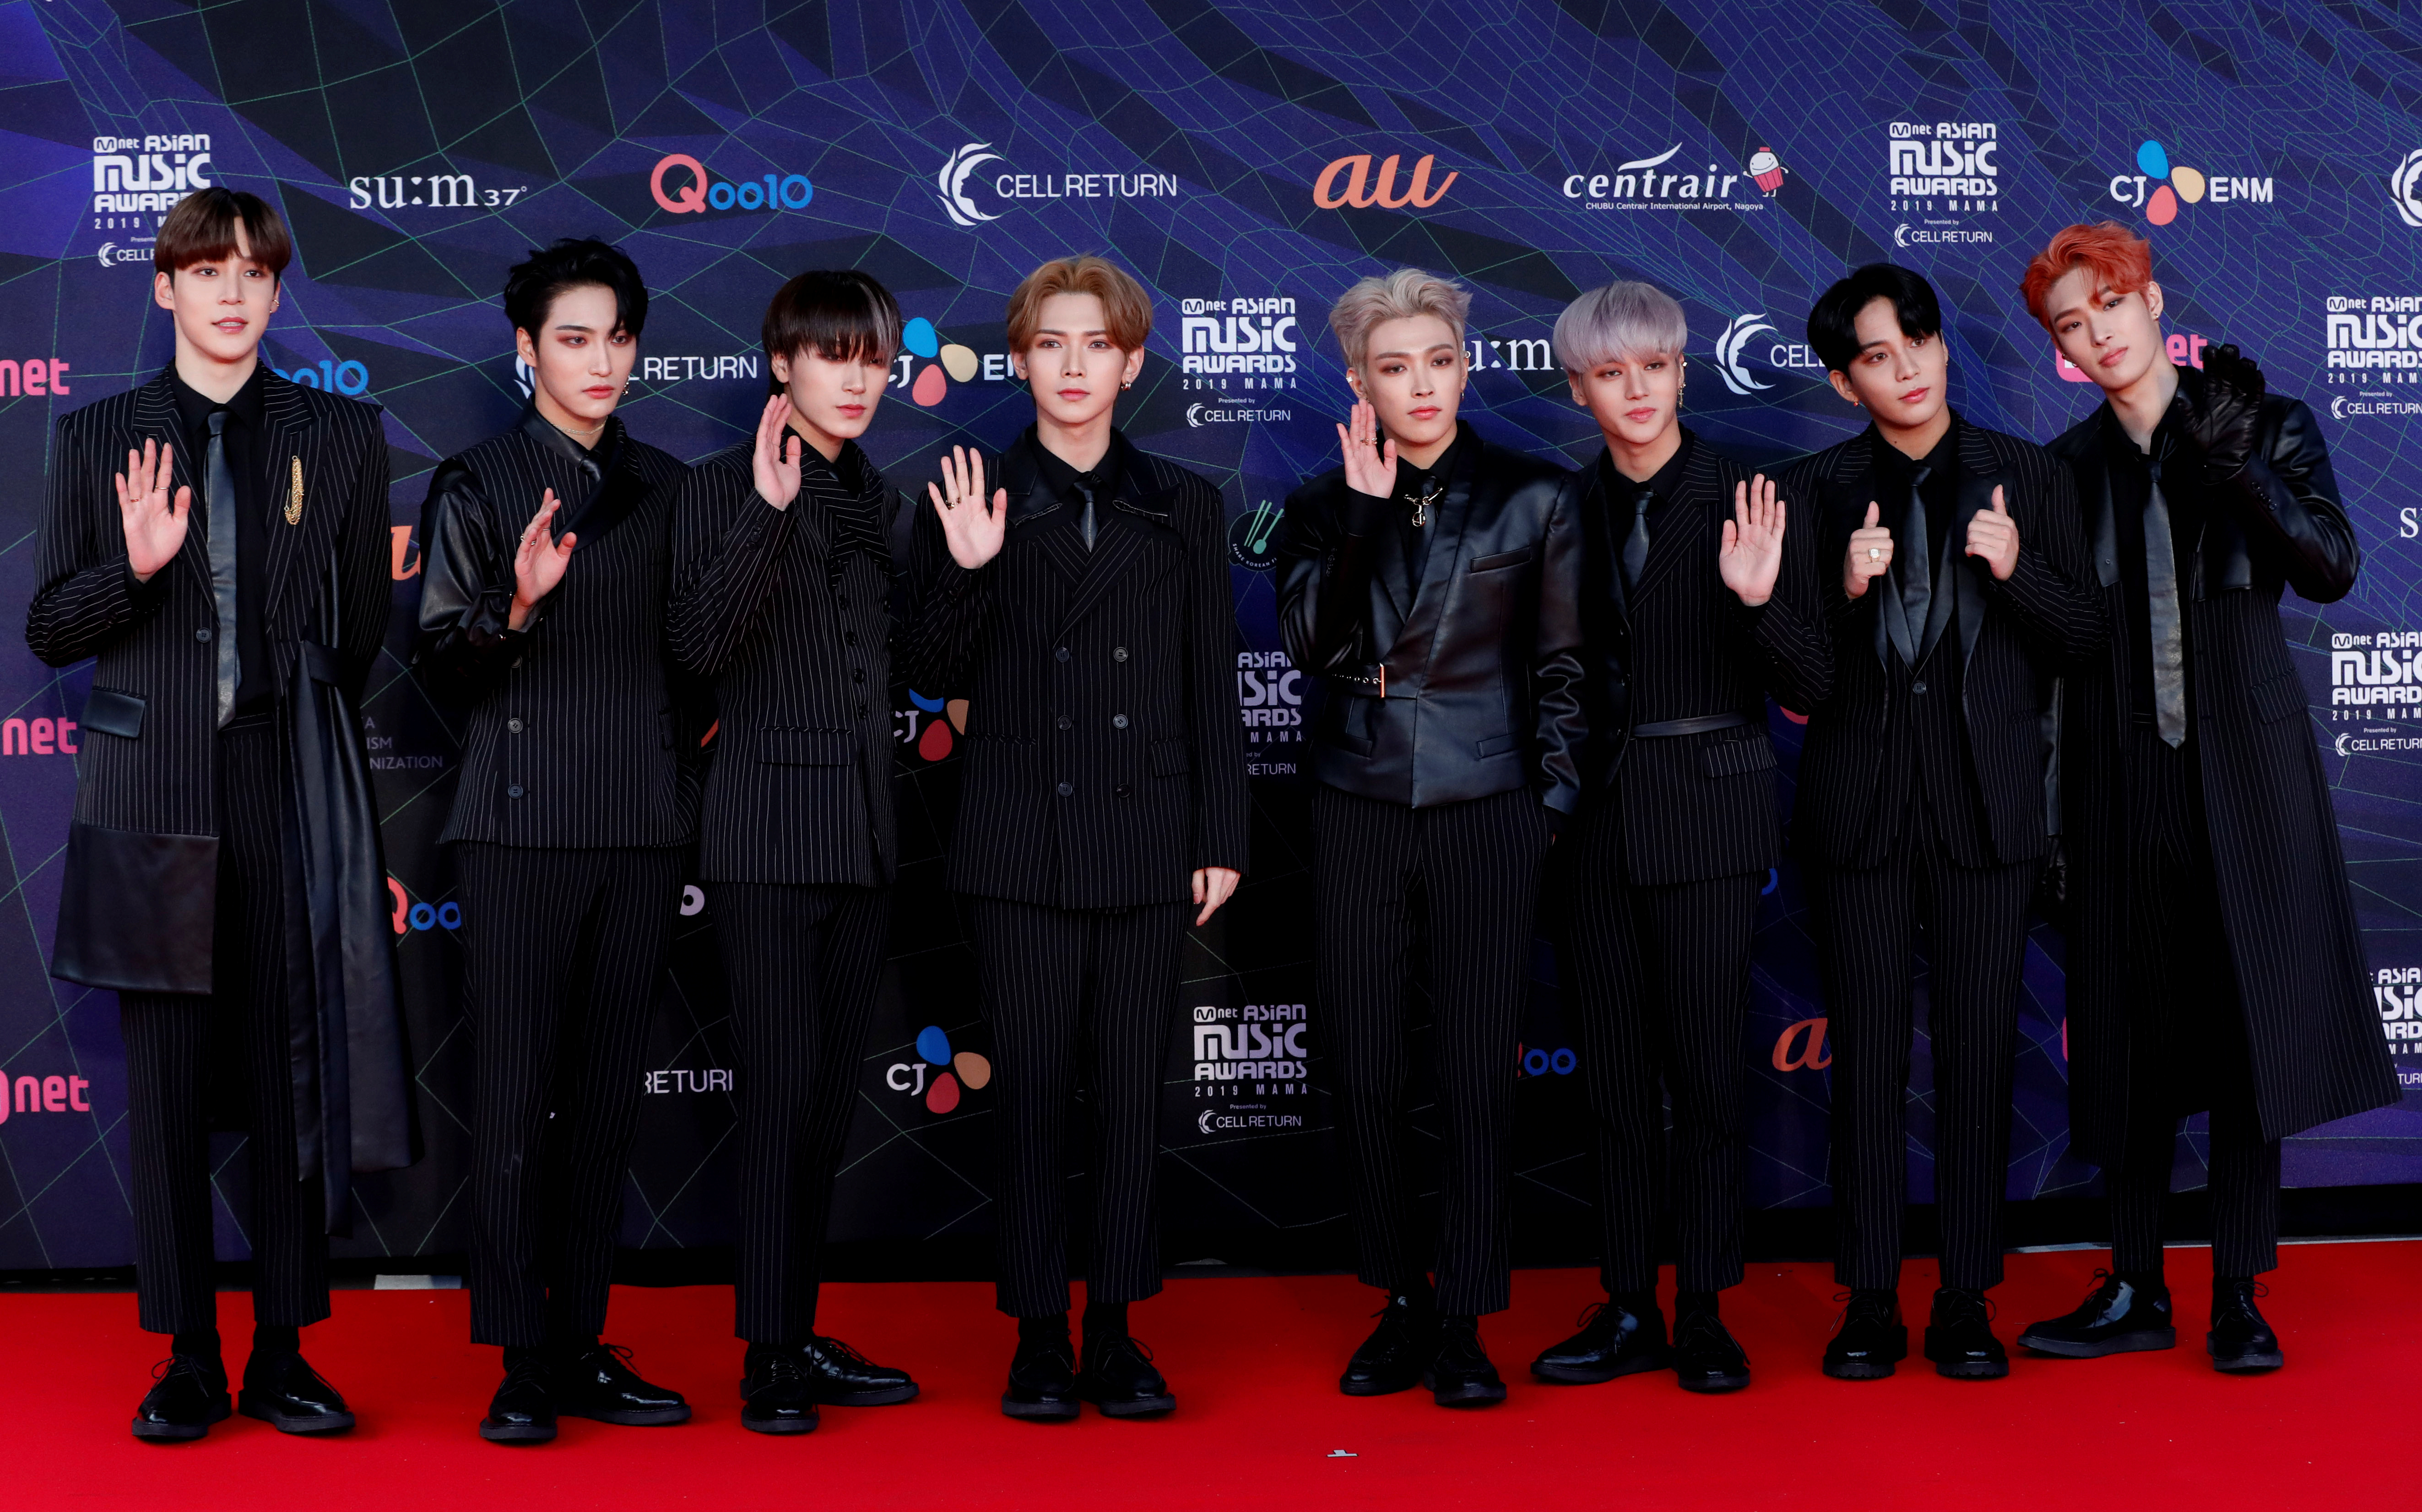 Members of South Korean boy band ATEEZ pose on the red carpet during the annual MAMA Awards at Nagoya Dome in Nagoya,